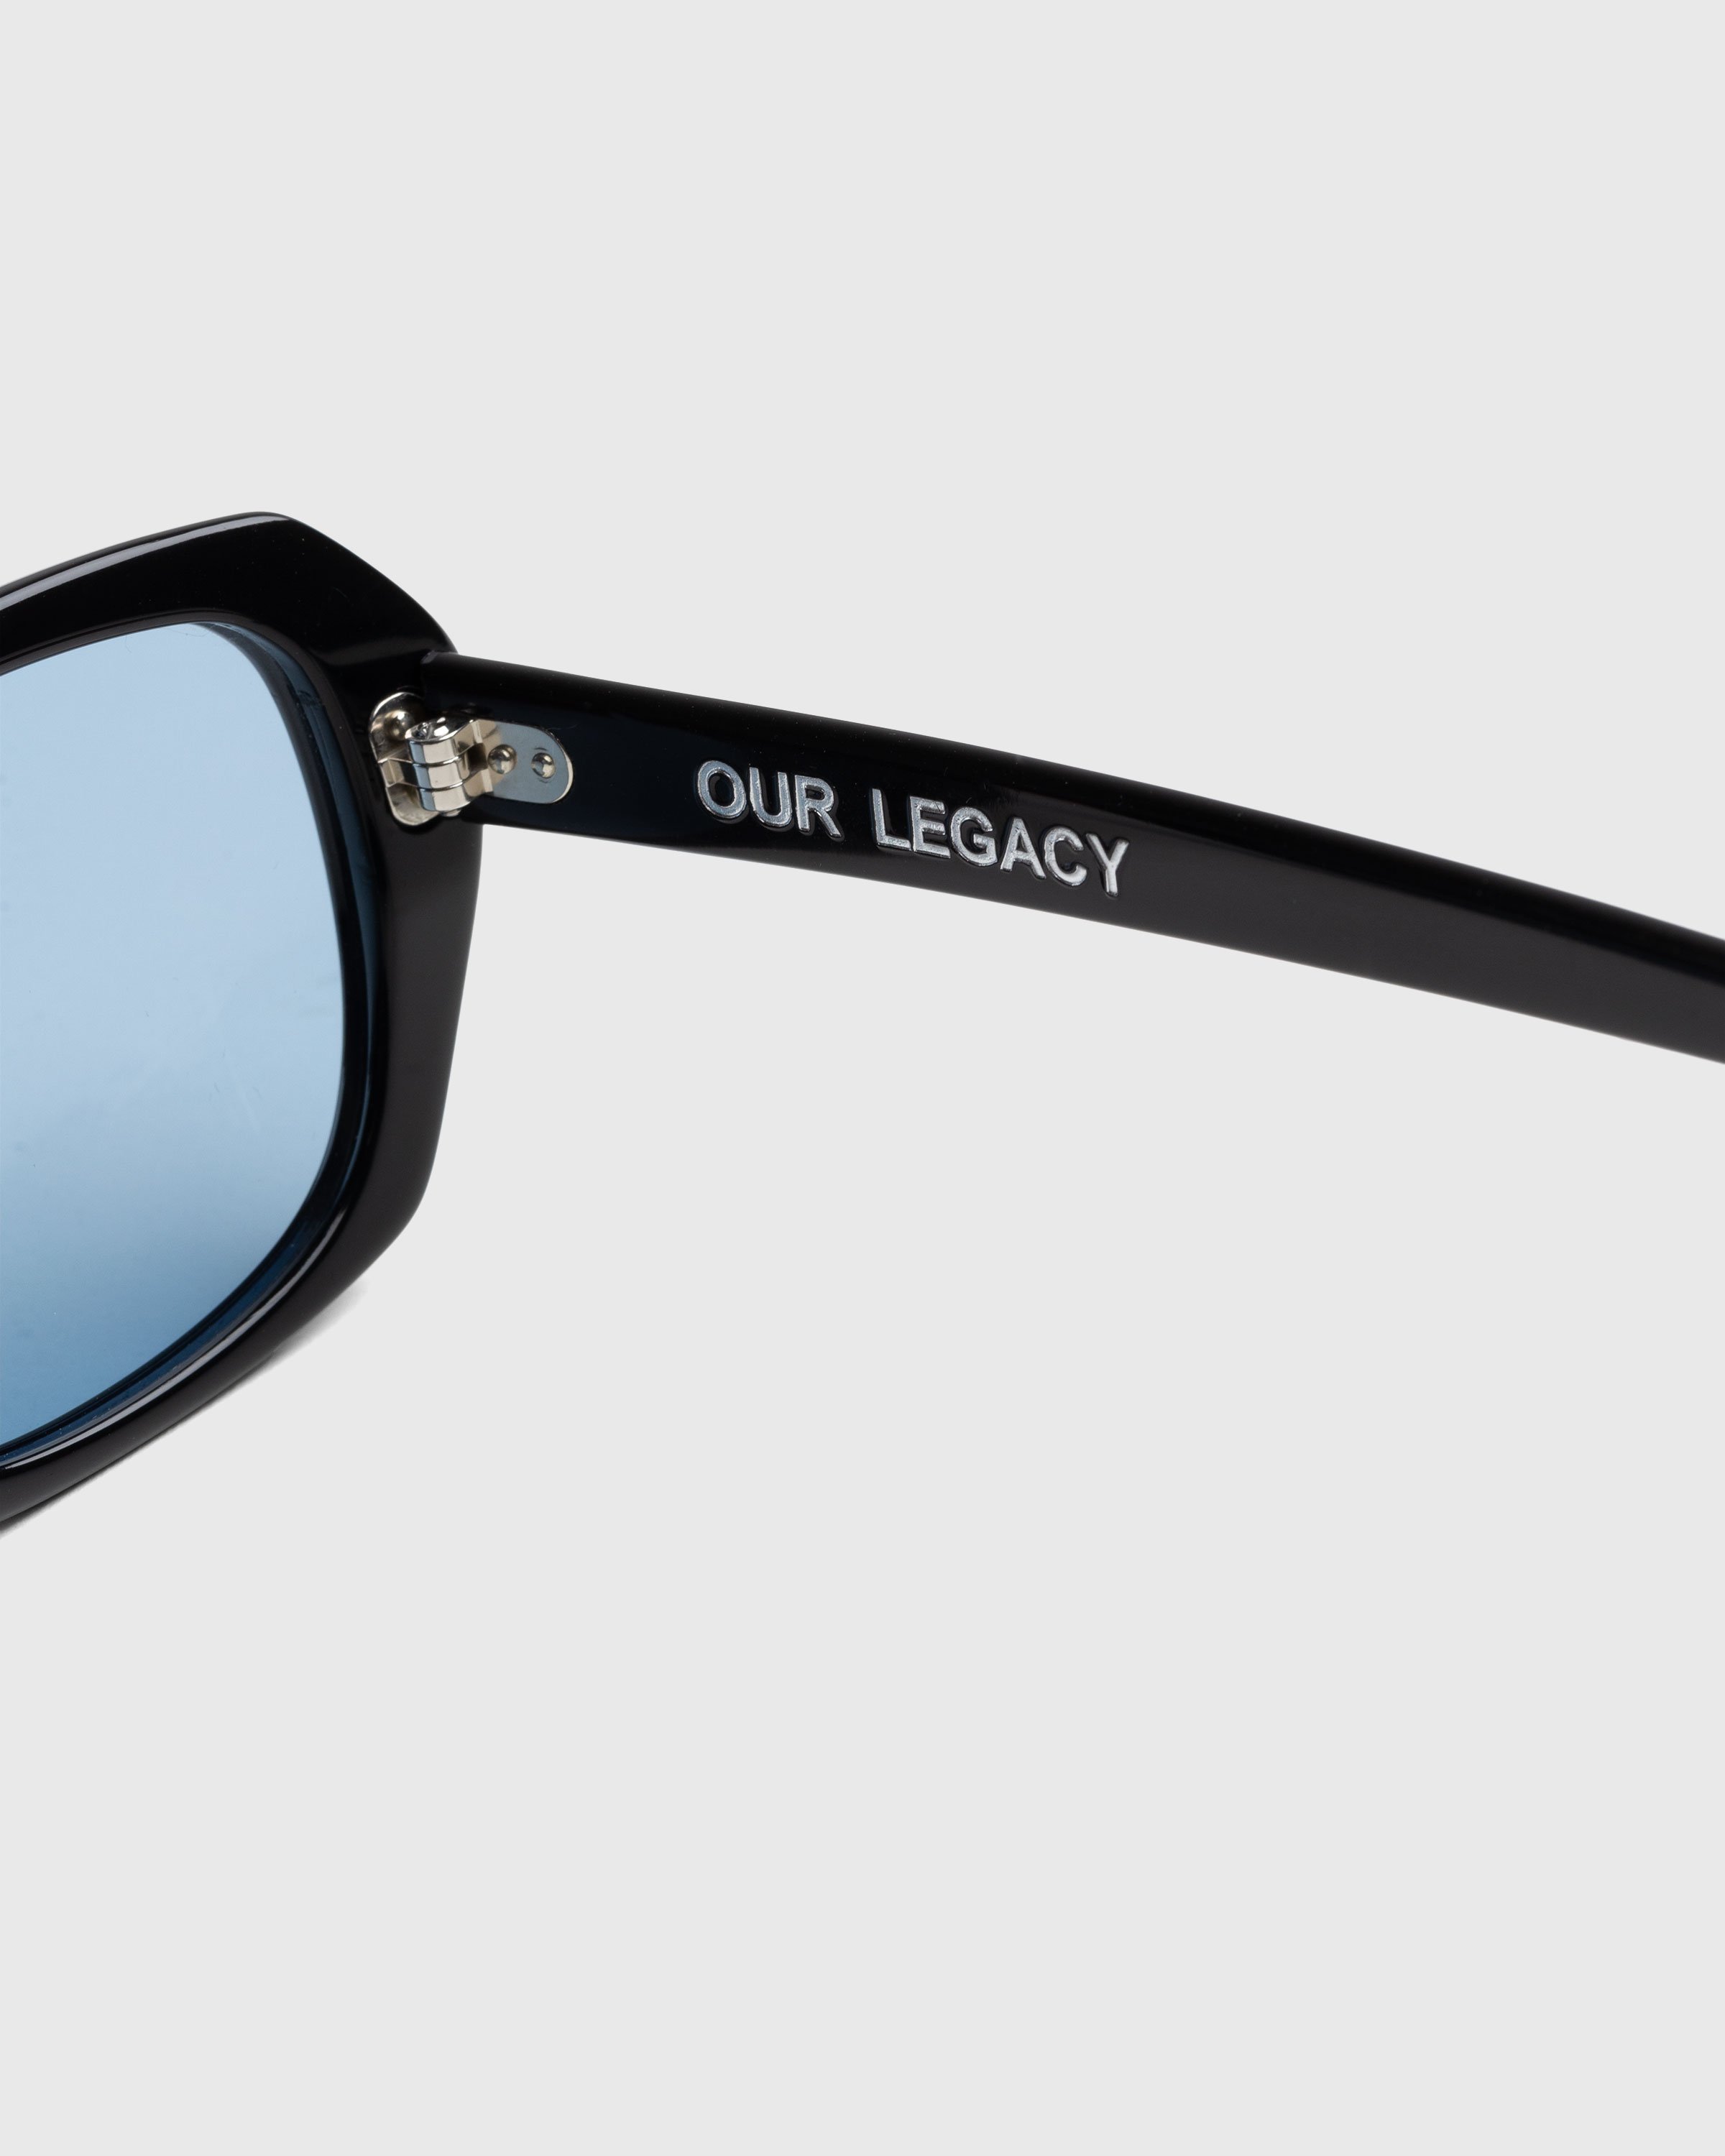 Our Legacy - Earth Sunglasses - Accessories - Black - Image 3